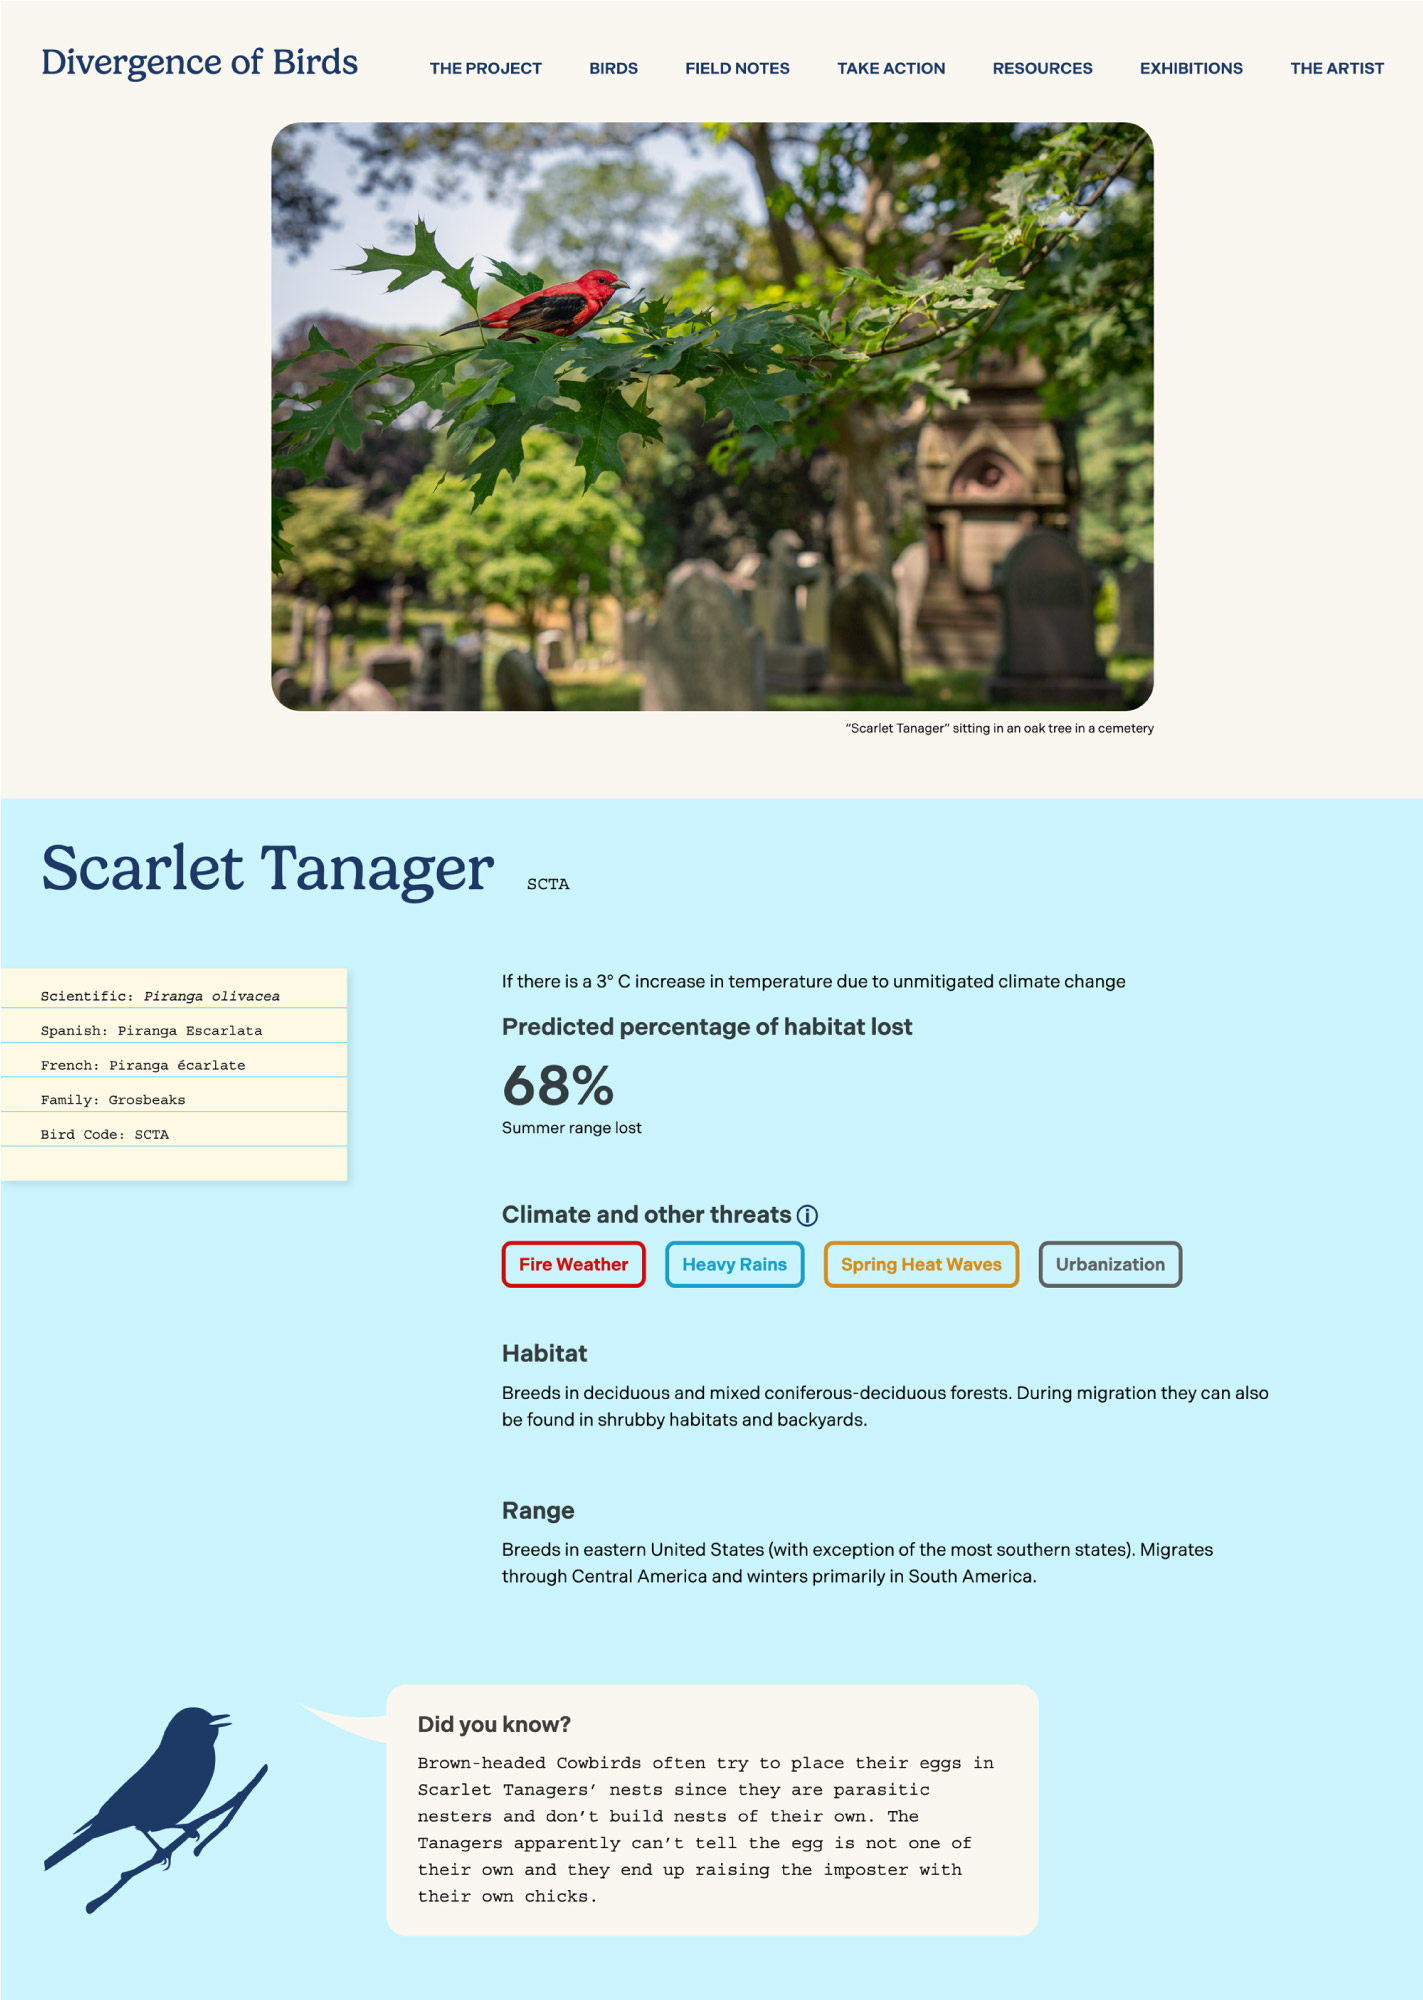 Screenshot of the Scarlet Tanager page